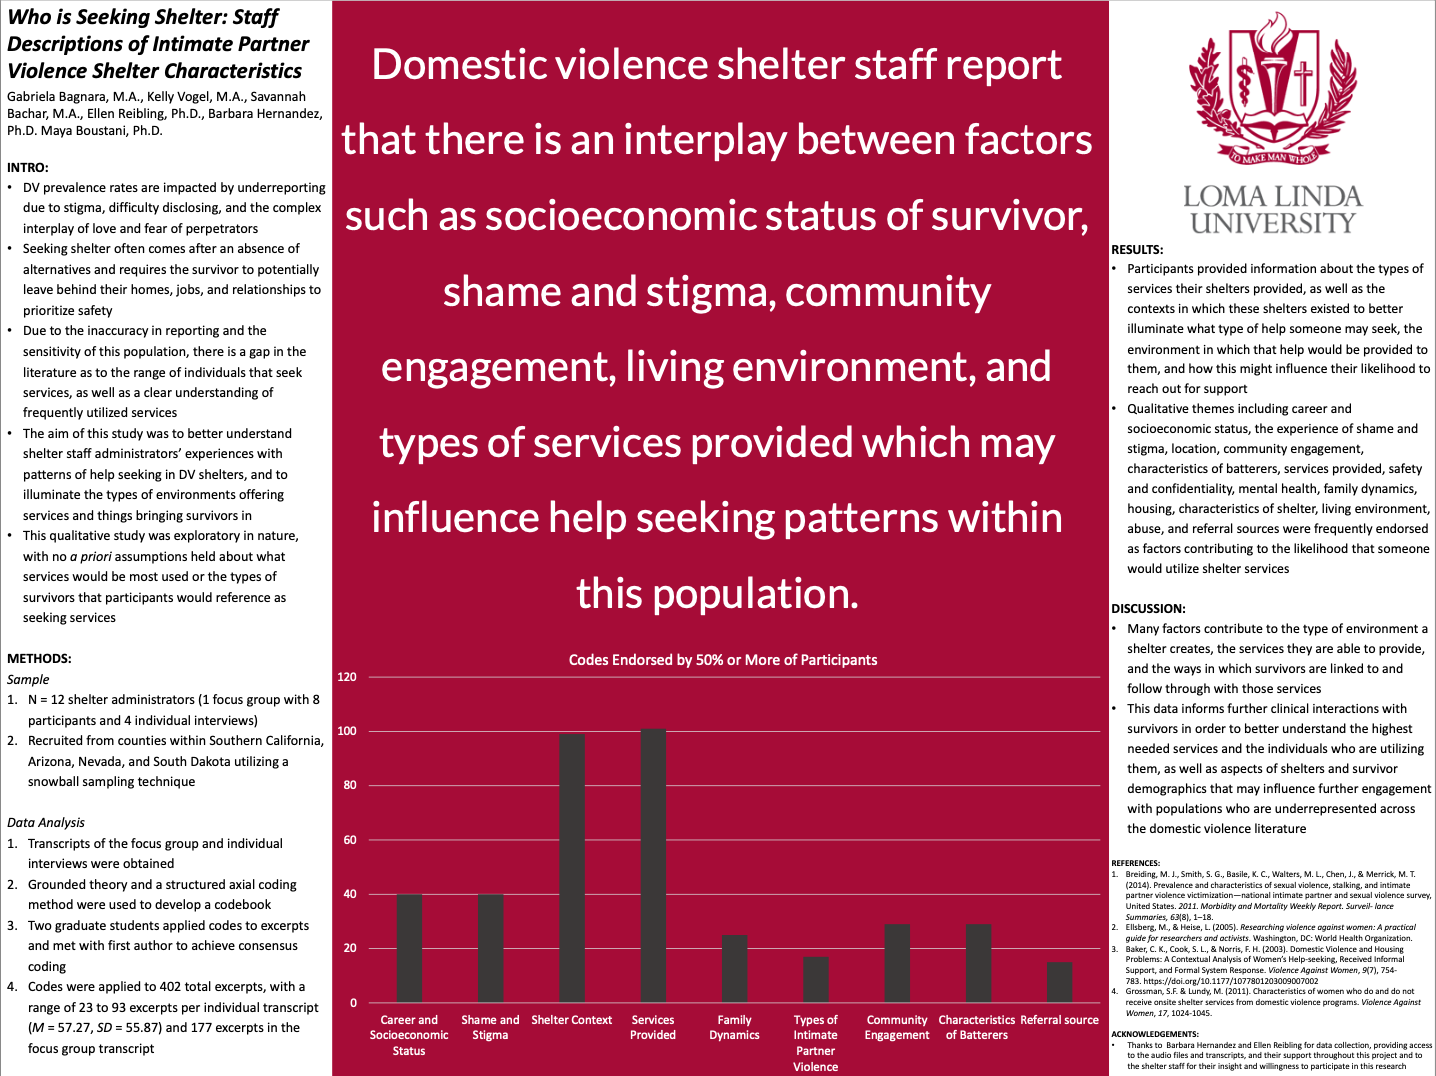 Who is Seeking Shelter: Staff Descriptions of Intimate Partner Violence Shelter Characteristics and Services Provided